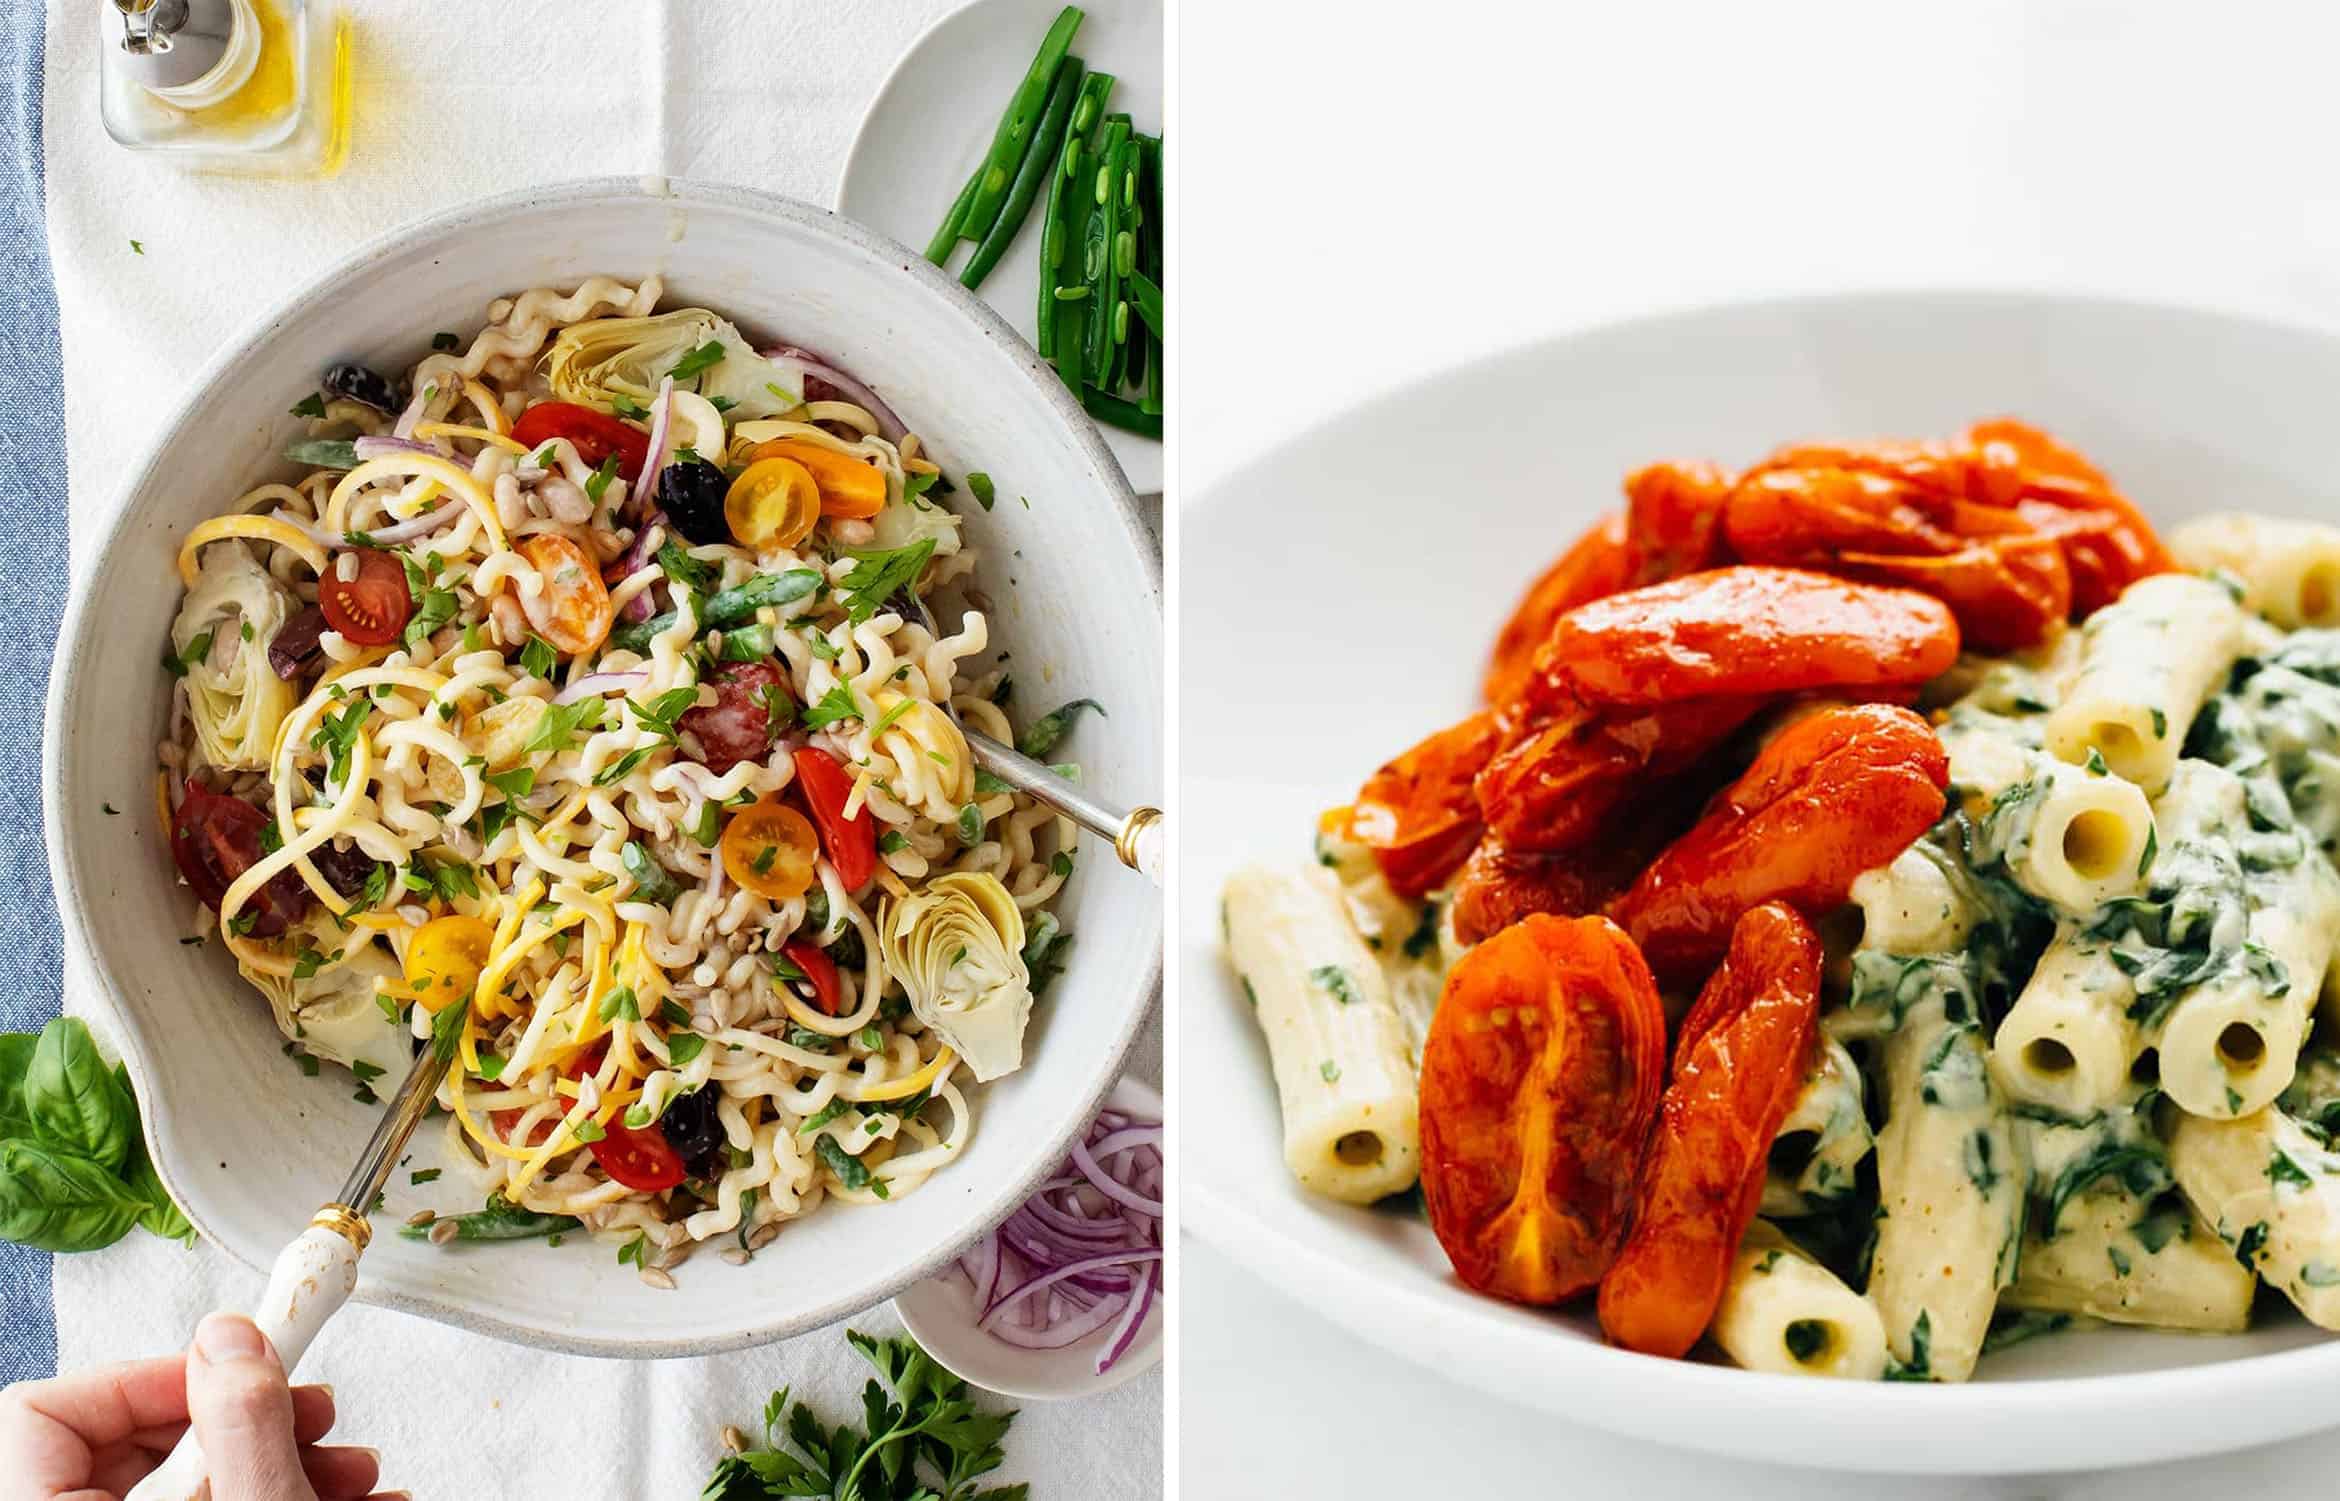 Creamy pasta salad with cherry tomatoes in a large bowl by Love & Lemons and Creamy pasta with roasted tomatoes on a white plate by Blissful Basil